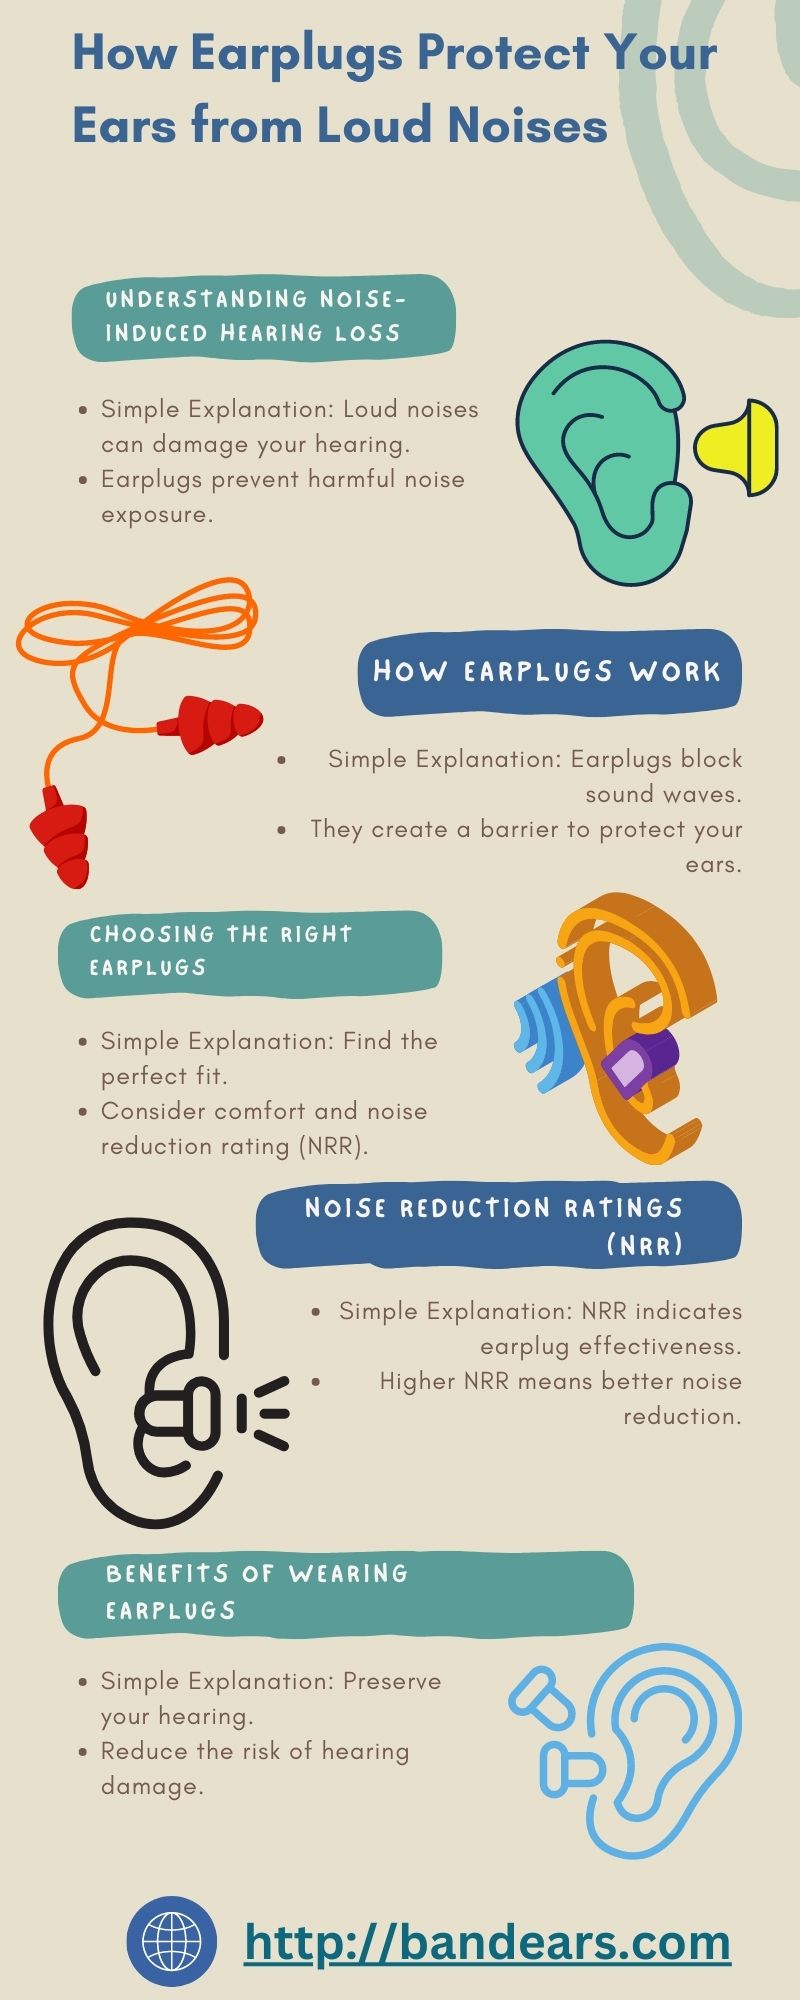 How Earplugs Protect Your Ears From Loud Noises